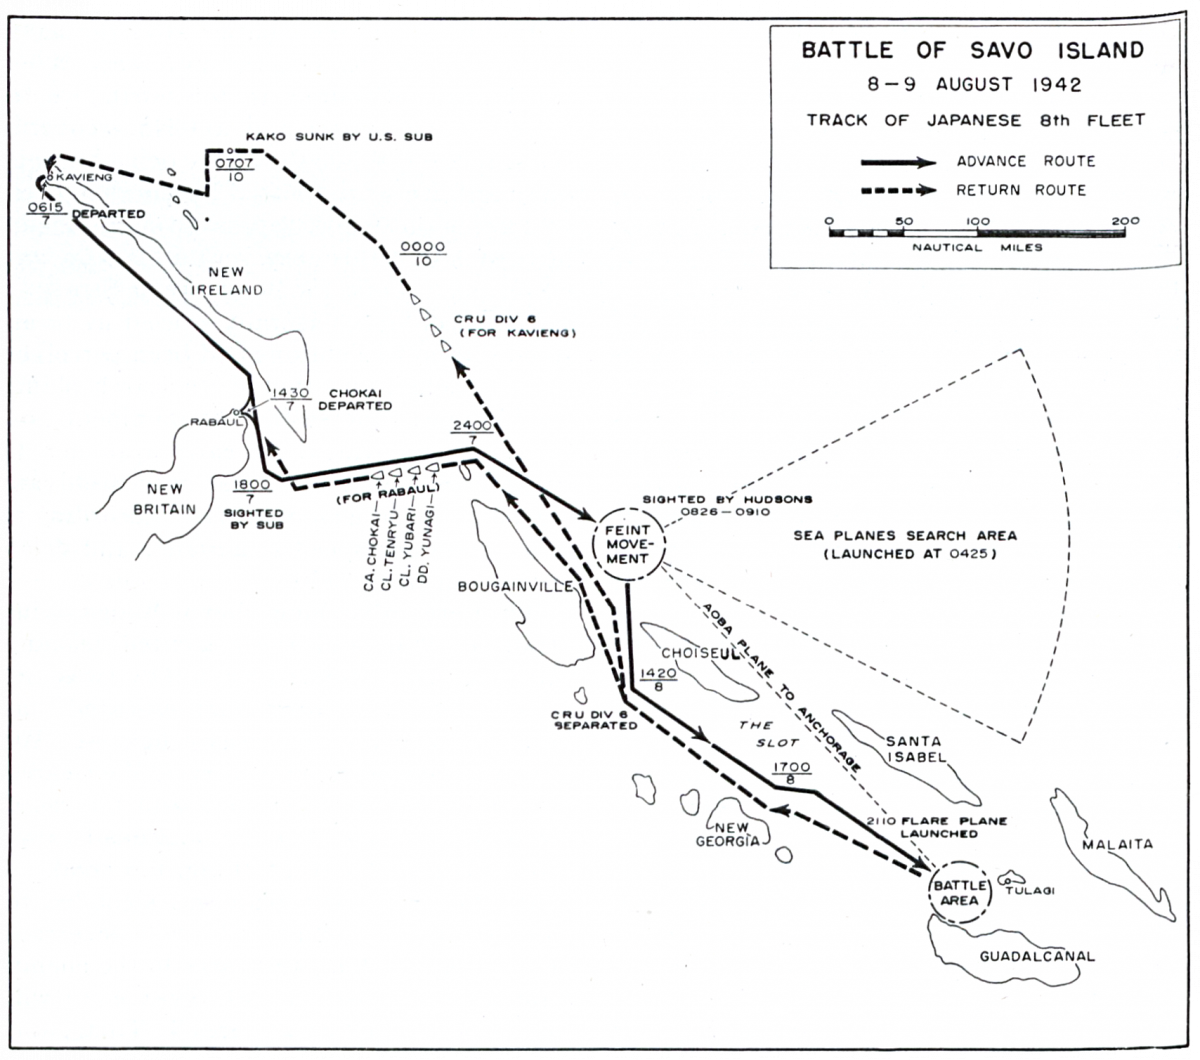 Map of the Battle of Savo Island showing track of Japanese 8th Fleet, 8-9 August 1942